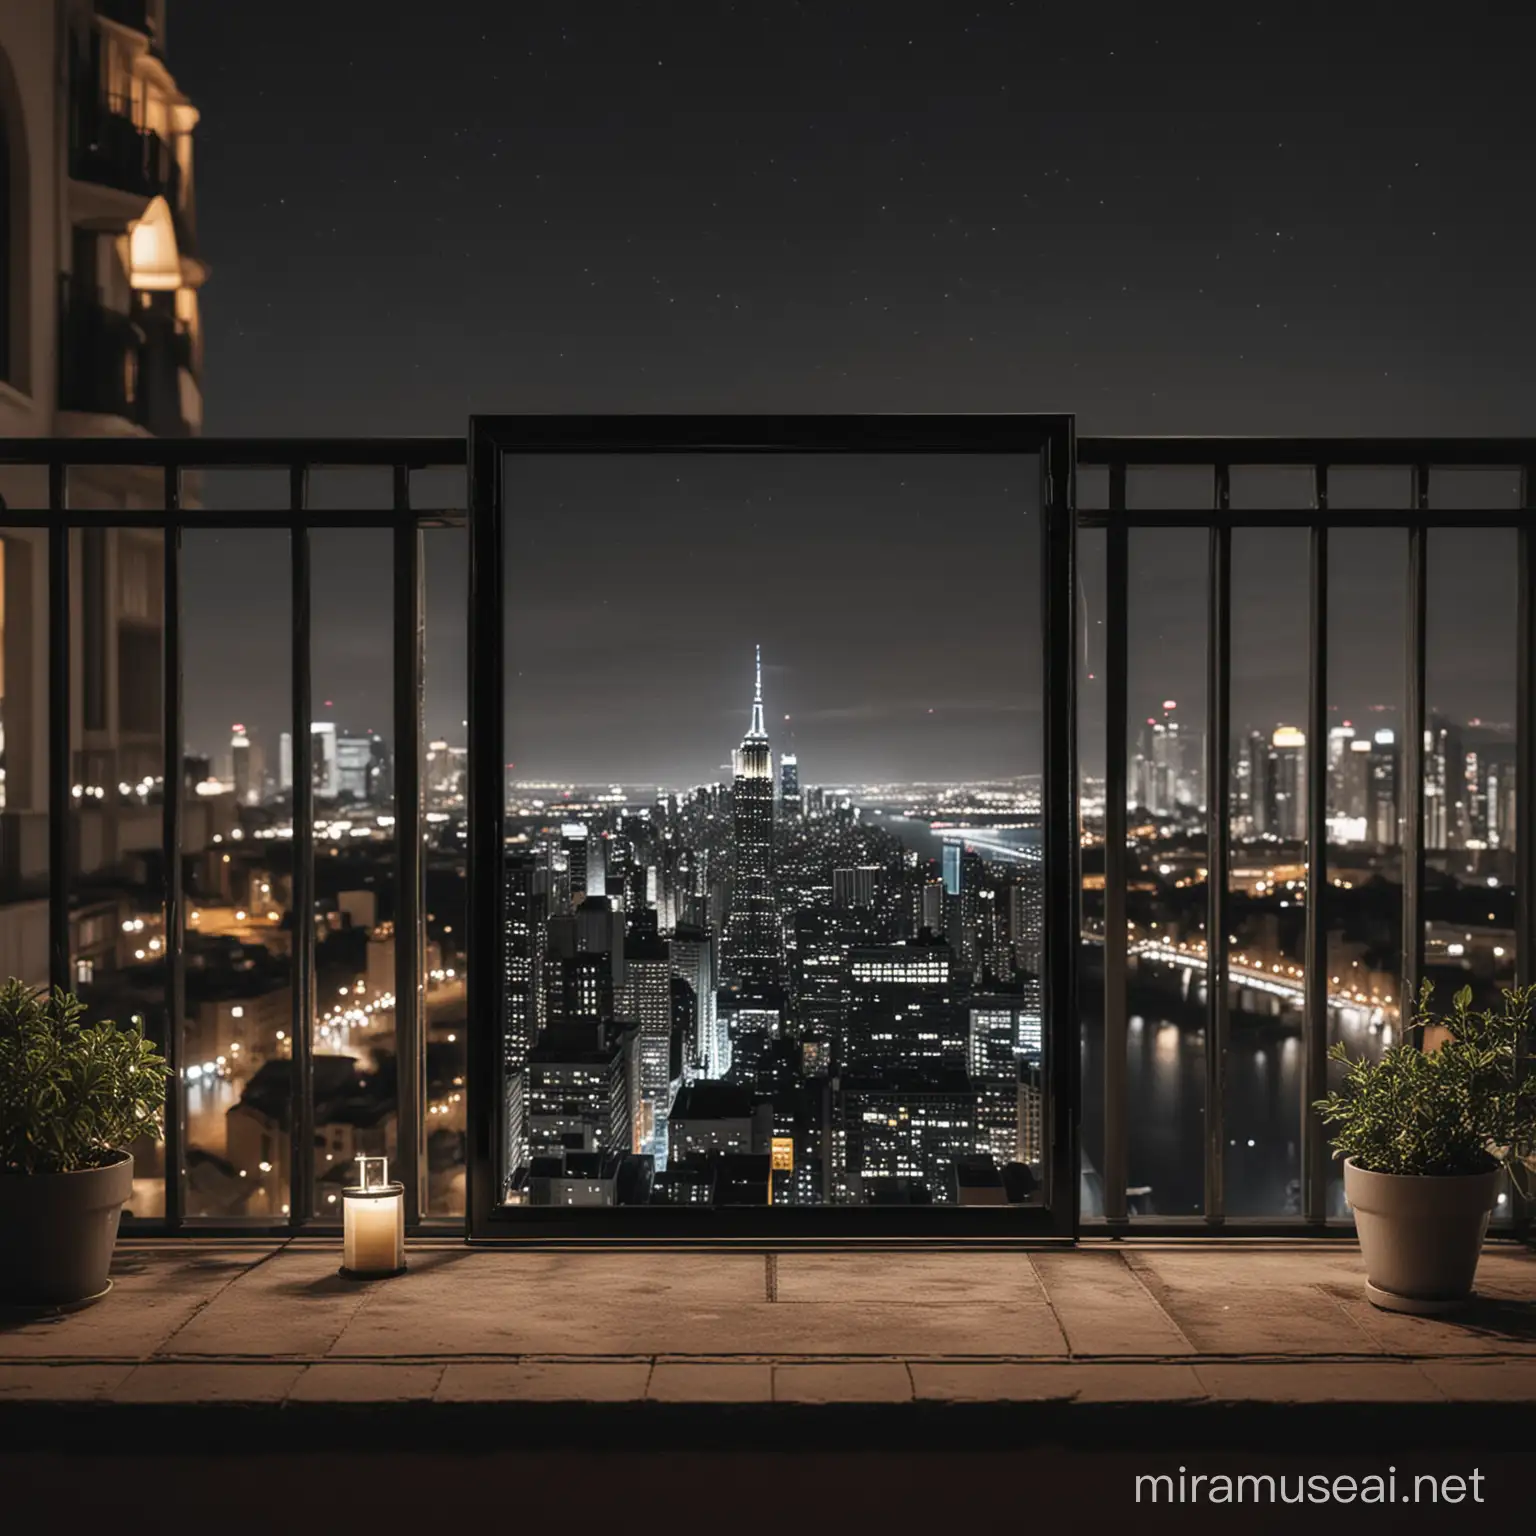 А4 black frame mockup on a balcony with a night city view